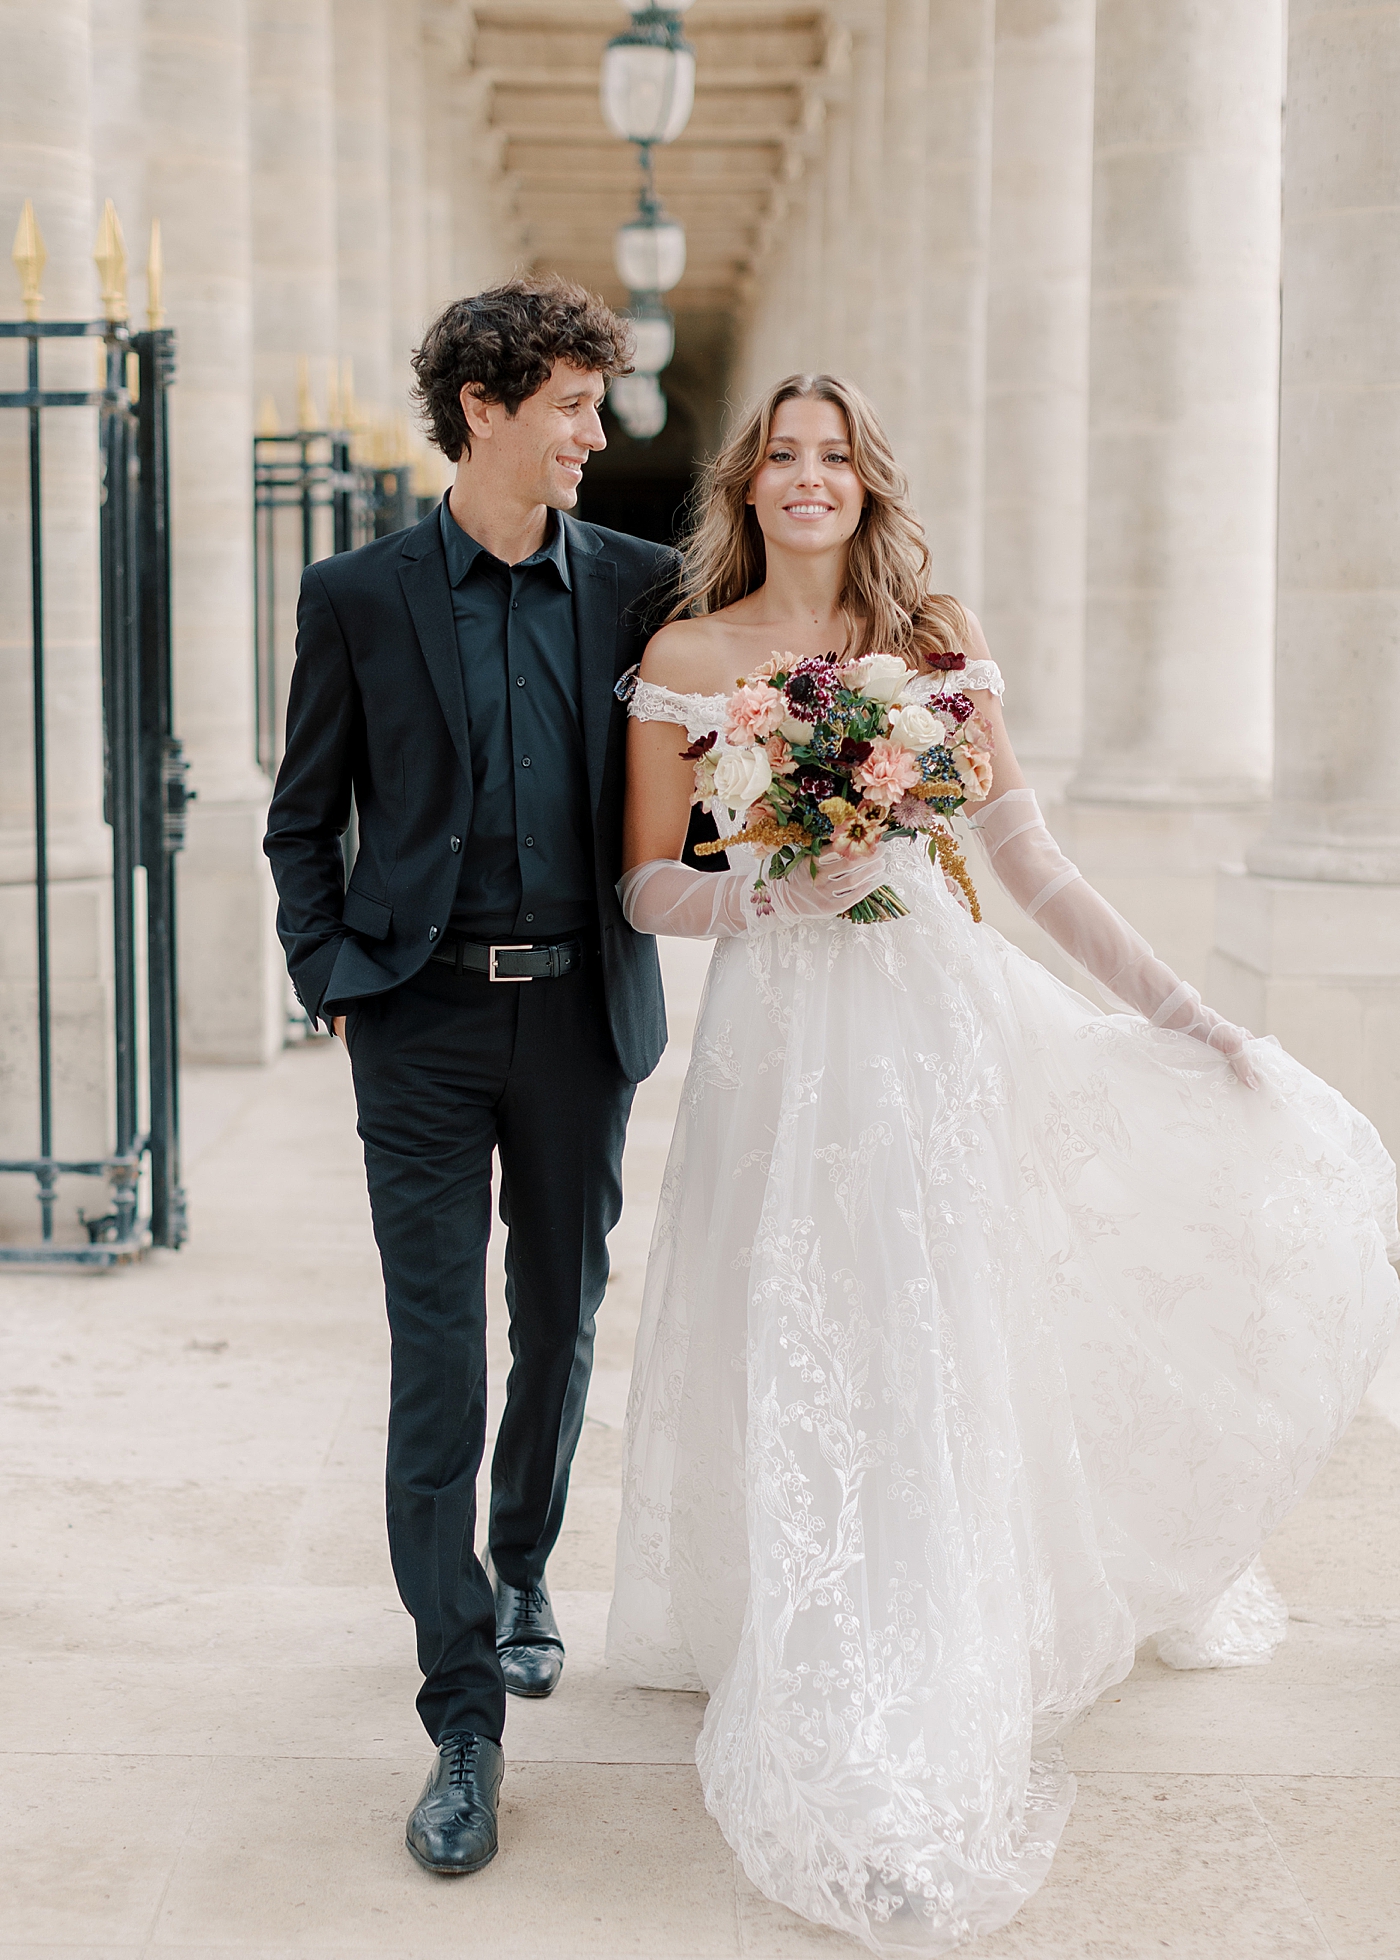 Image of a bride and groom embracing and walking towards the camera in an outdoor, sunlit, concrete corridor | Image by Hope Helmuth Photography